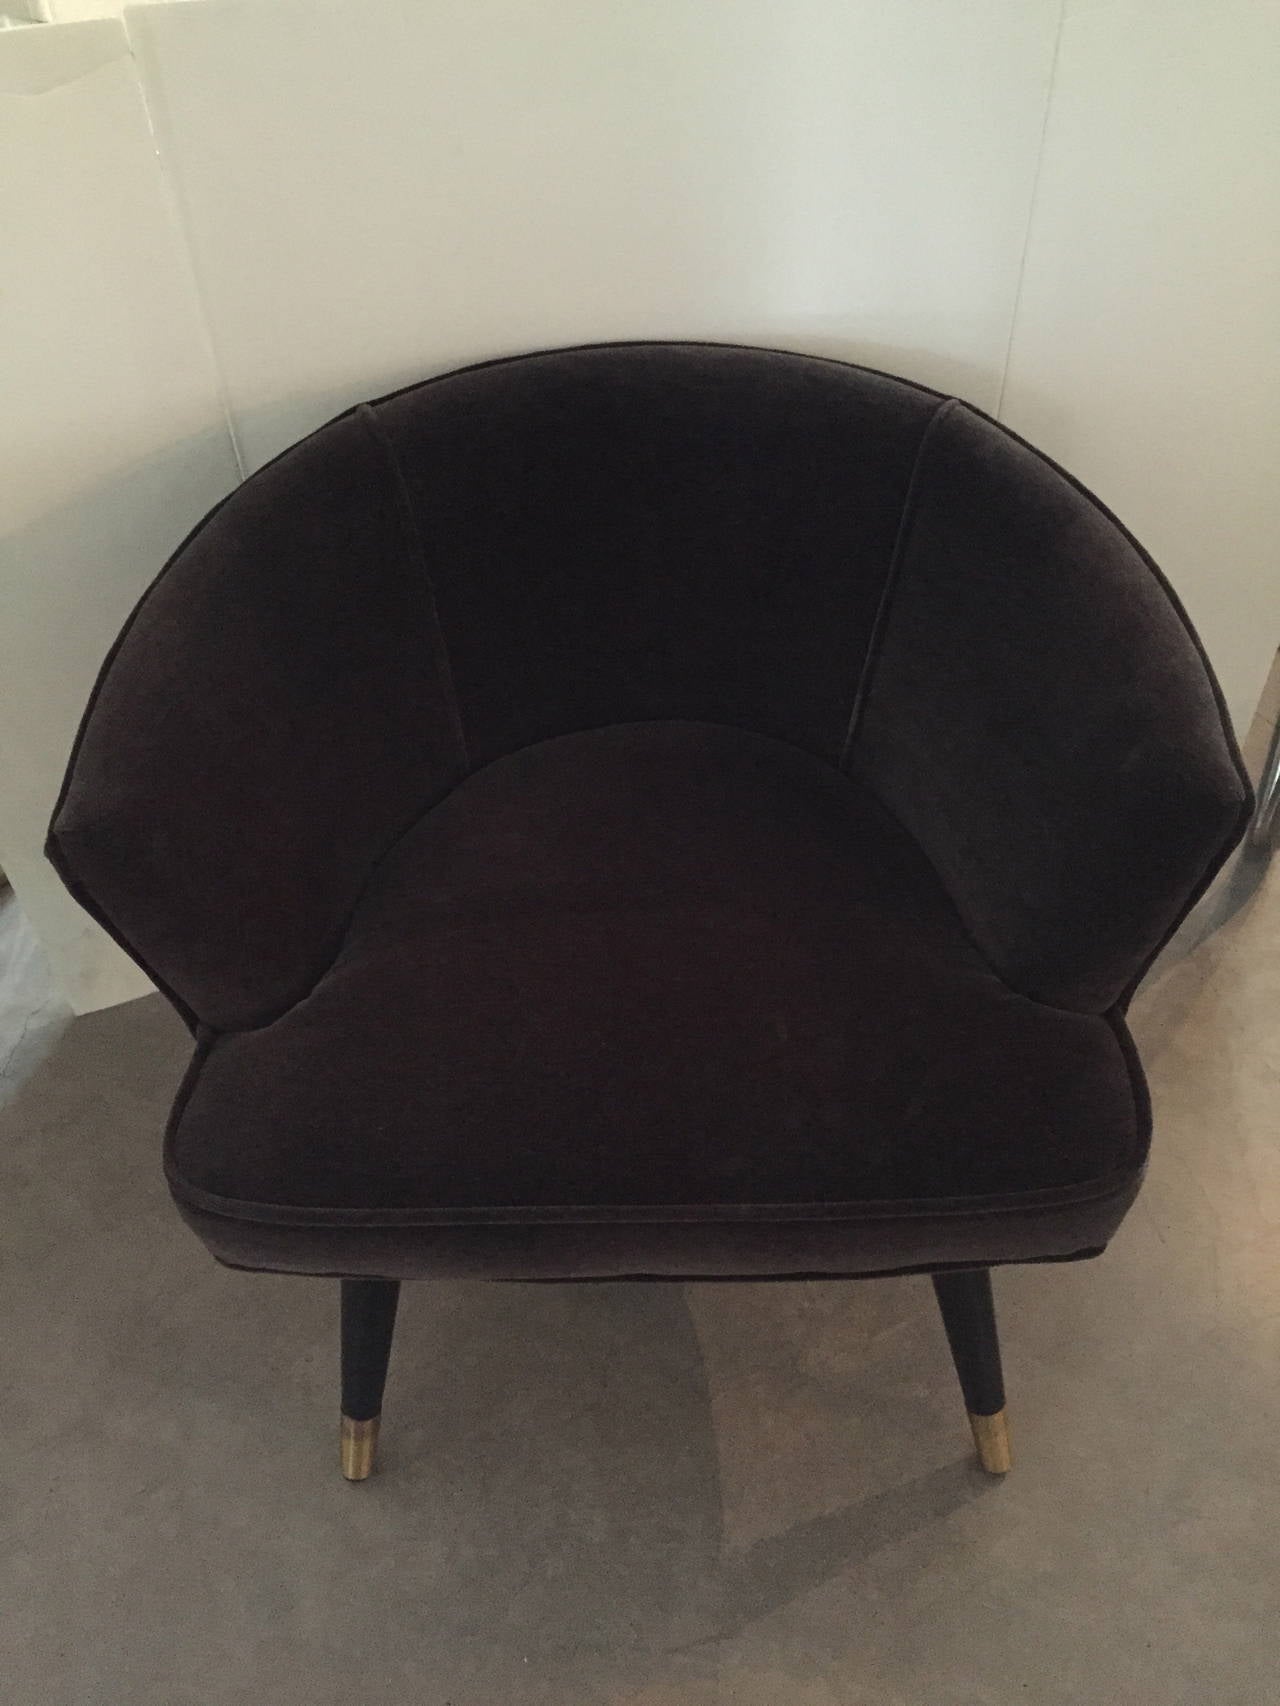 This beautiful demure Parisian armchair is newly upholstered in charcoal mohair velvet with the added chic touch of brass, accenting the wood legs. This versatile armchair could go just about anywhere in one’s home, office or shop.